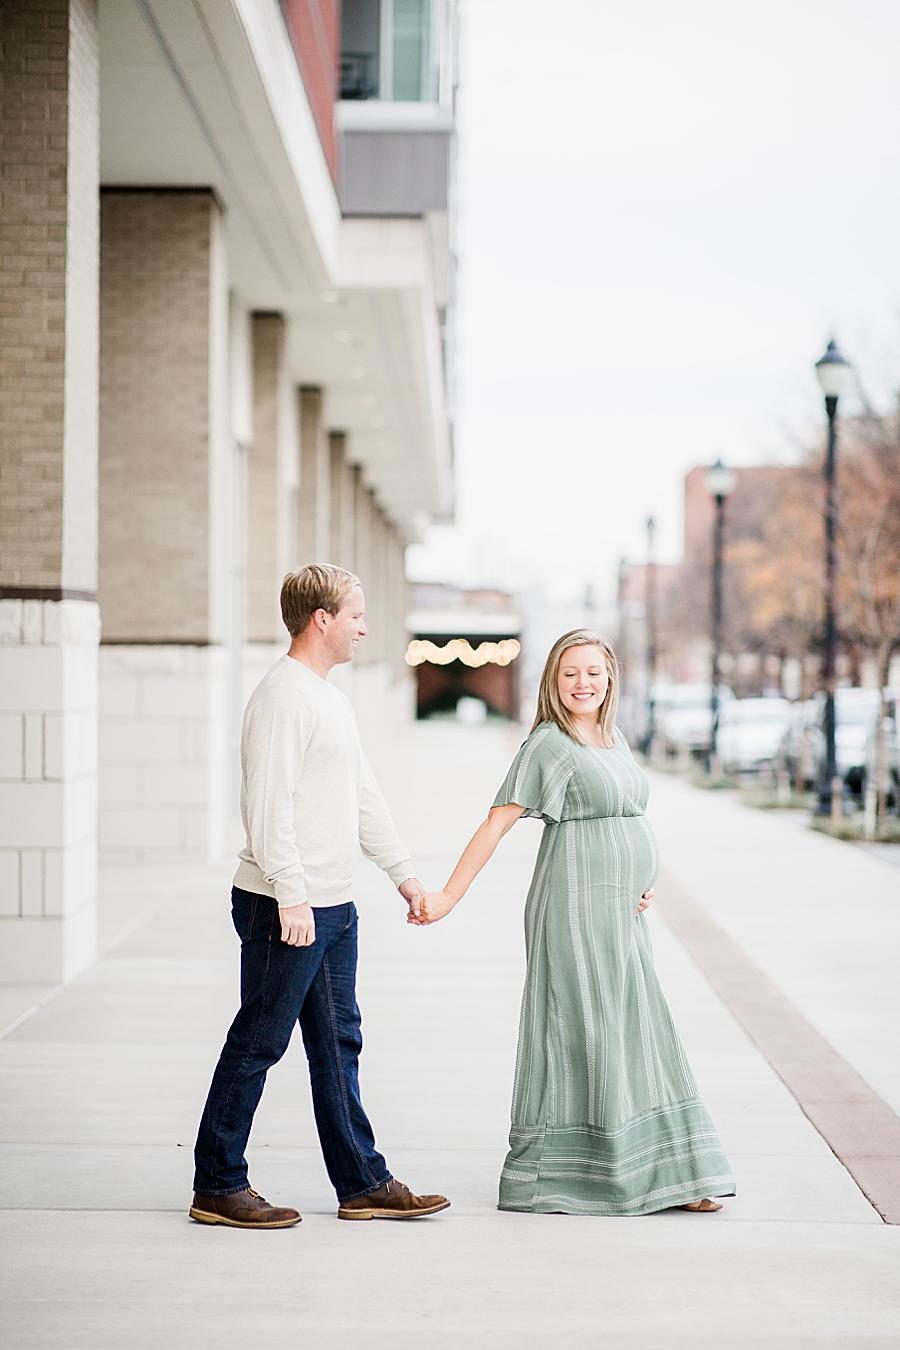 Oatmeal sweater by Knoxville Wedding Photographer, Amanda May Photos.